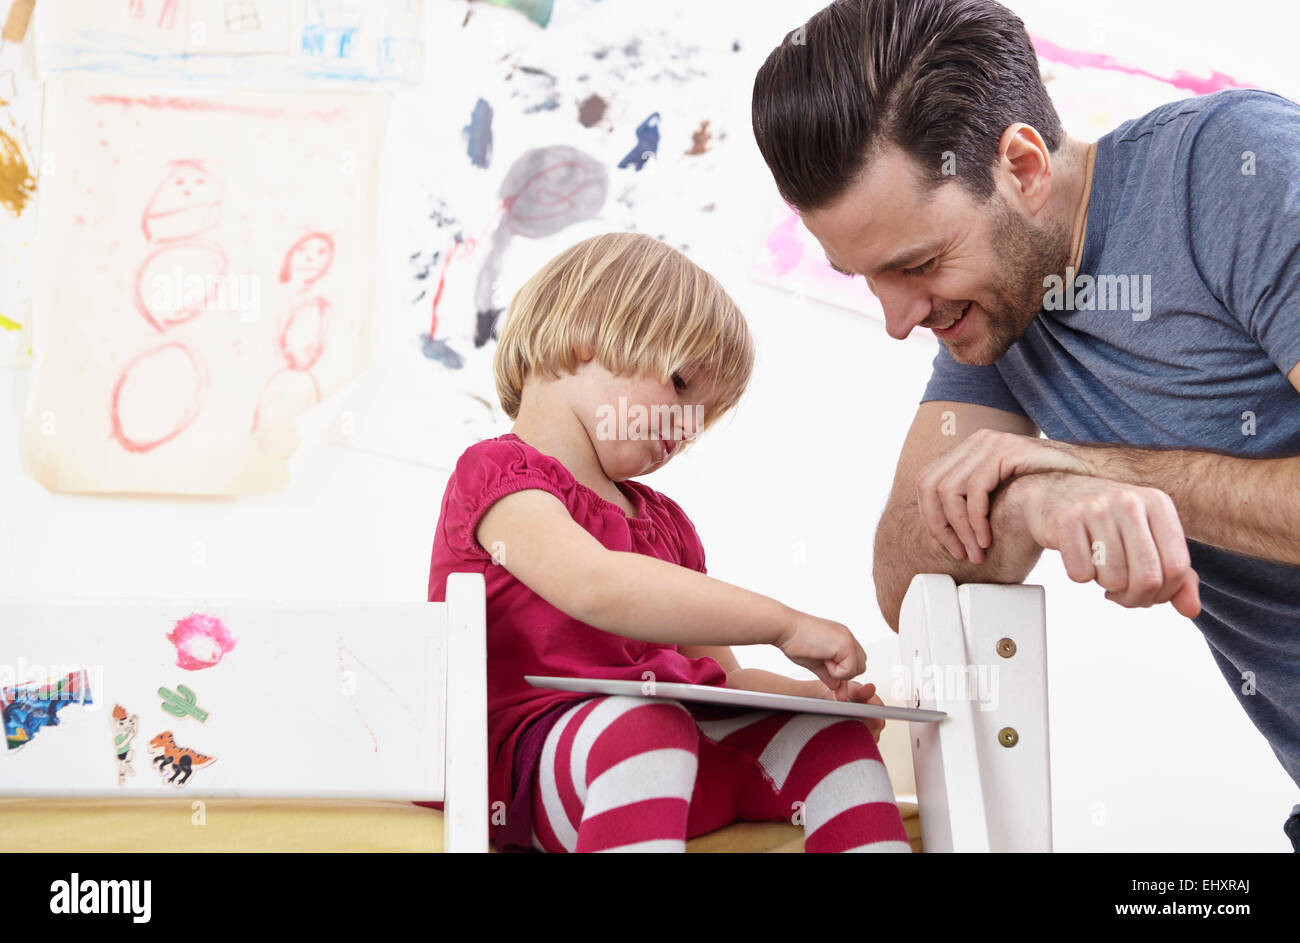 Little girl sitting on bunk bed, drawing on touch pad, father watching Stock Photo